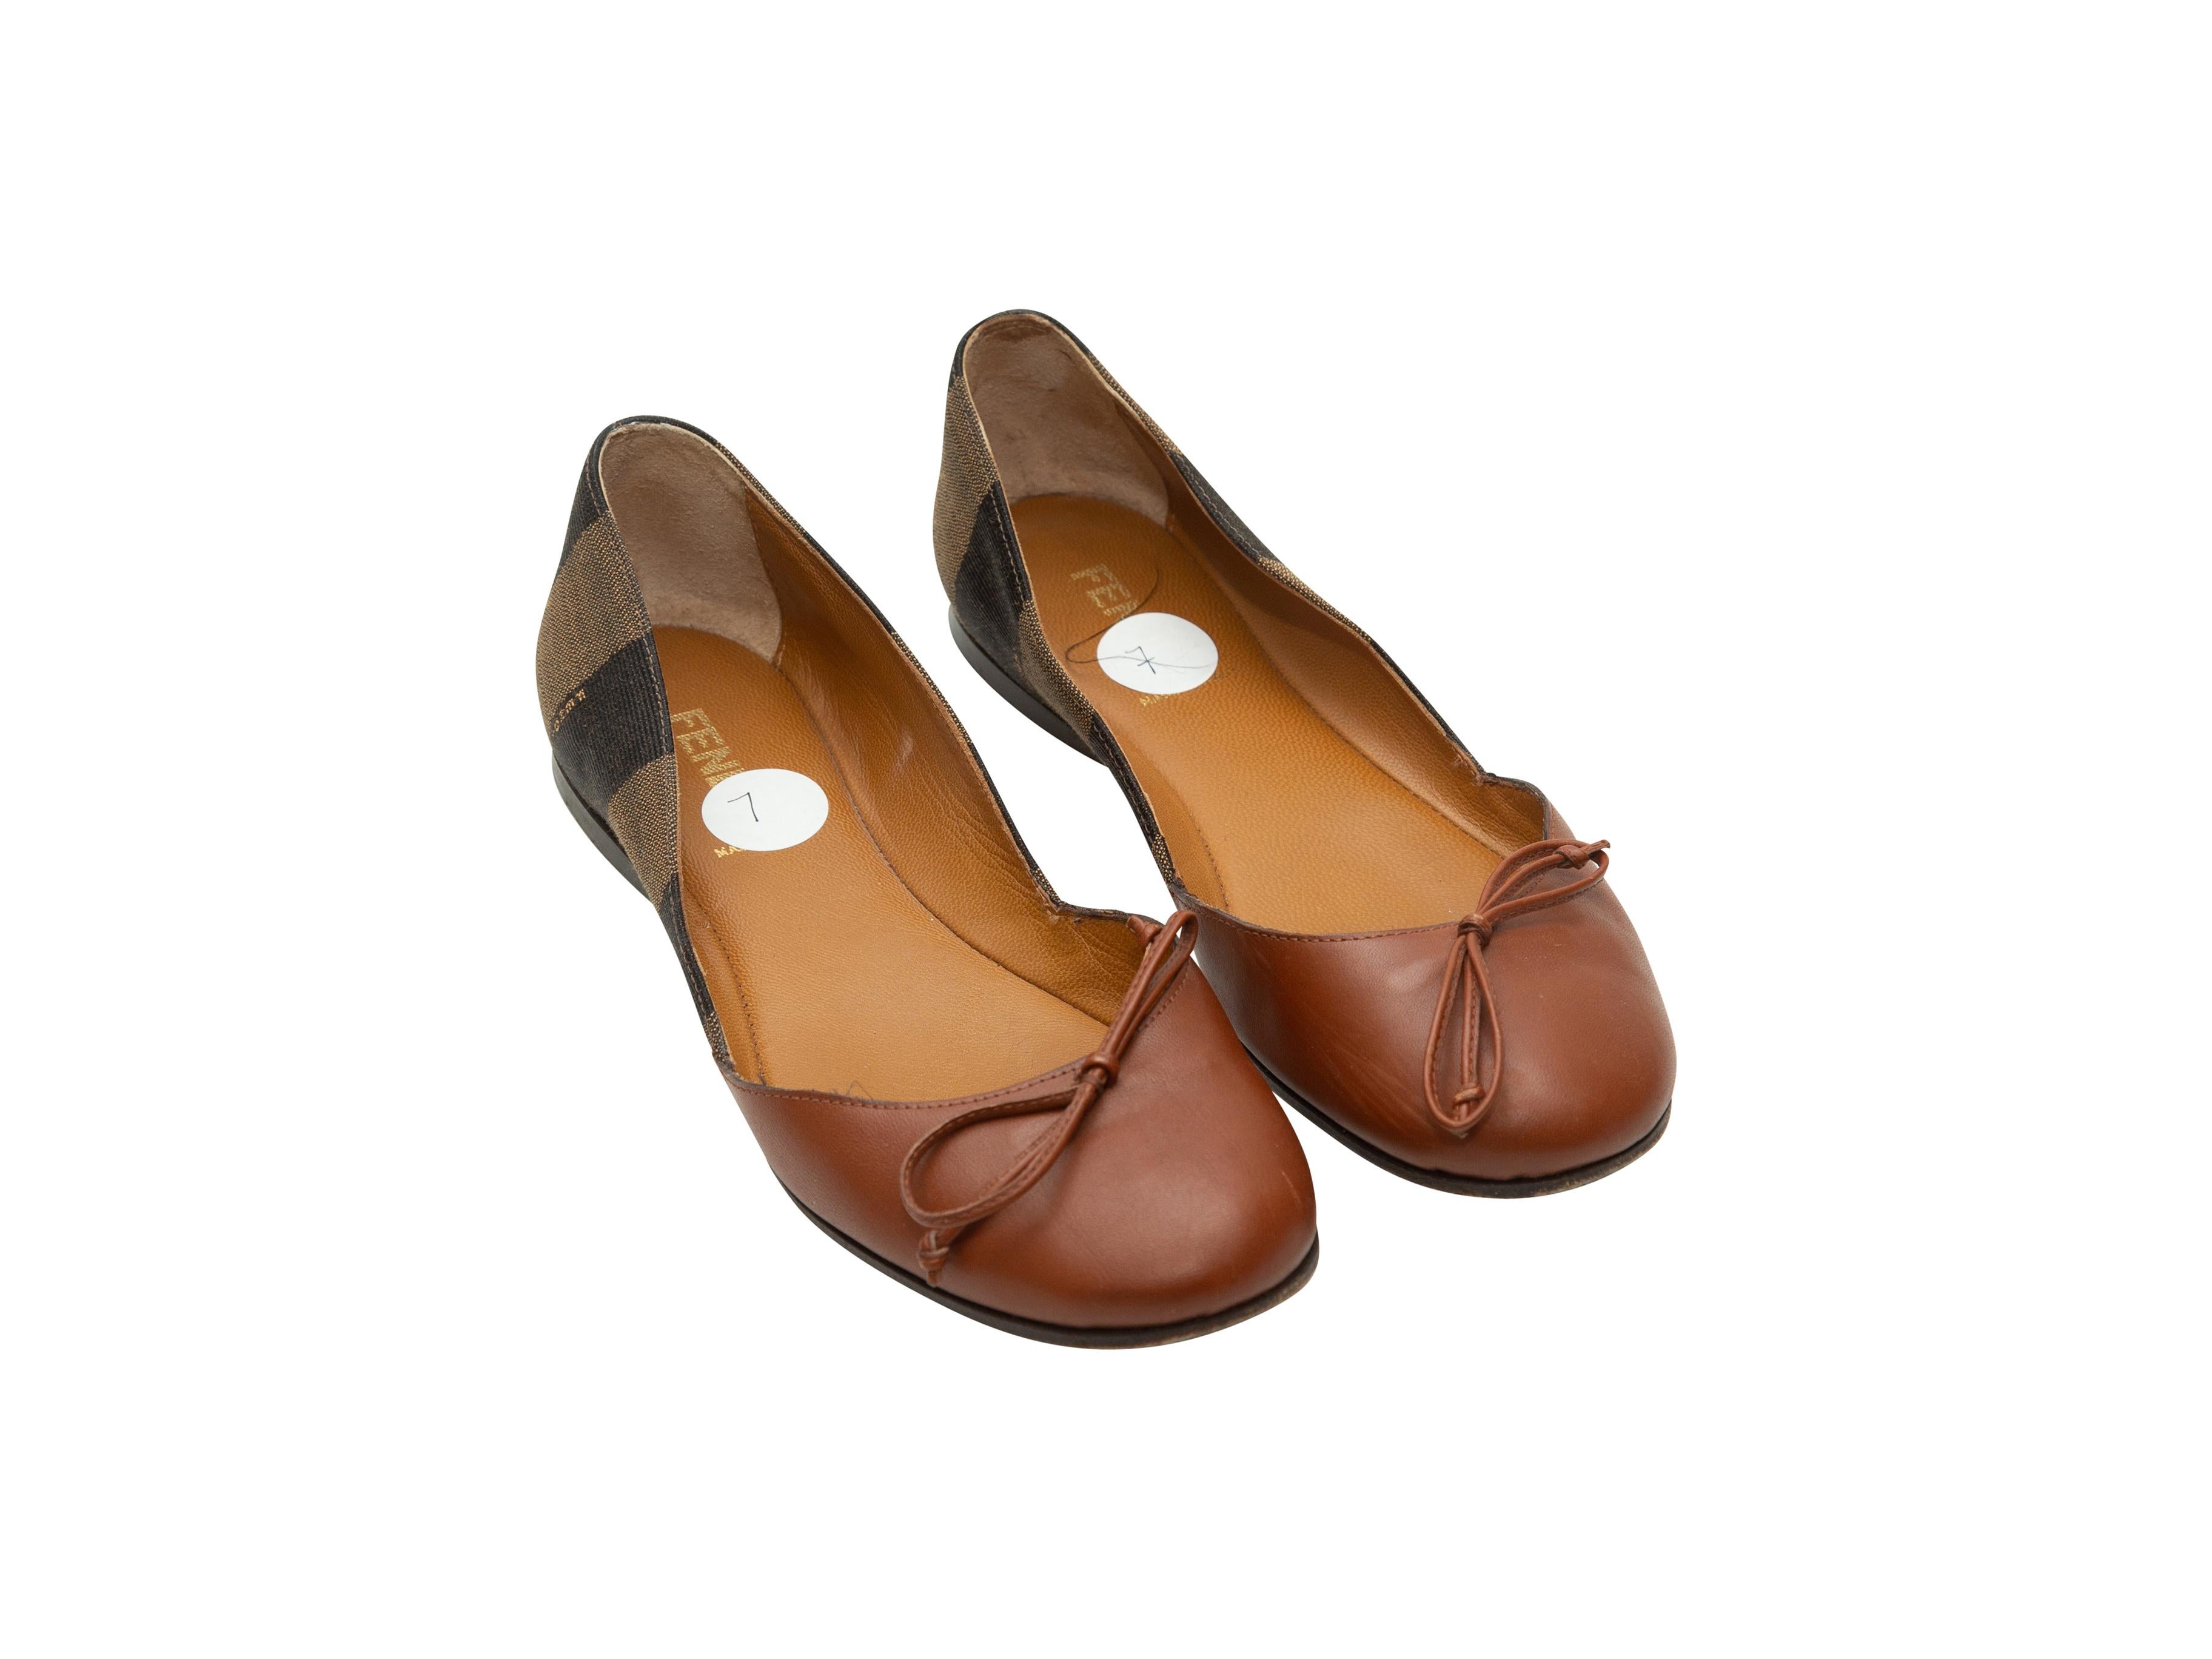 Product details: Brown leather and Pequin round-toe ballet flats by Fendi. Bow accents at tops. Designer size 37. 
Condition: Pre-owned. Good. Scuffing at outer soles. Wear at the interior toe box.
Est. Retail $ 825.00